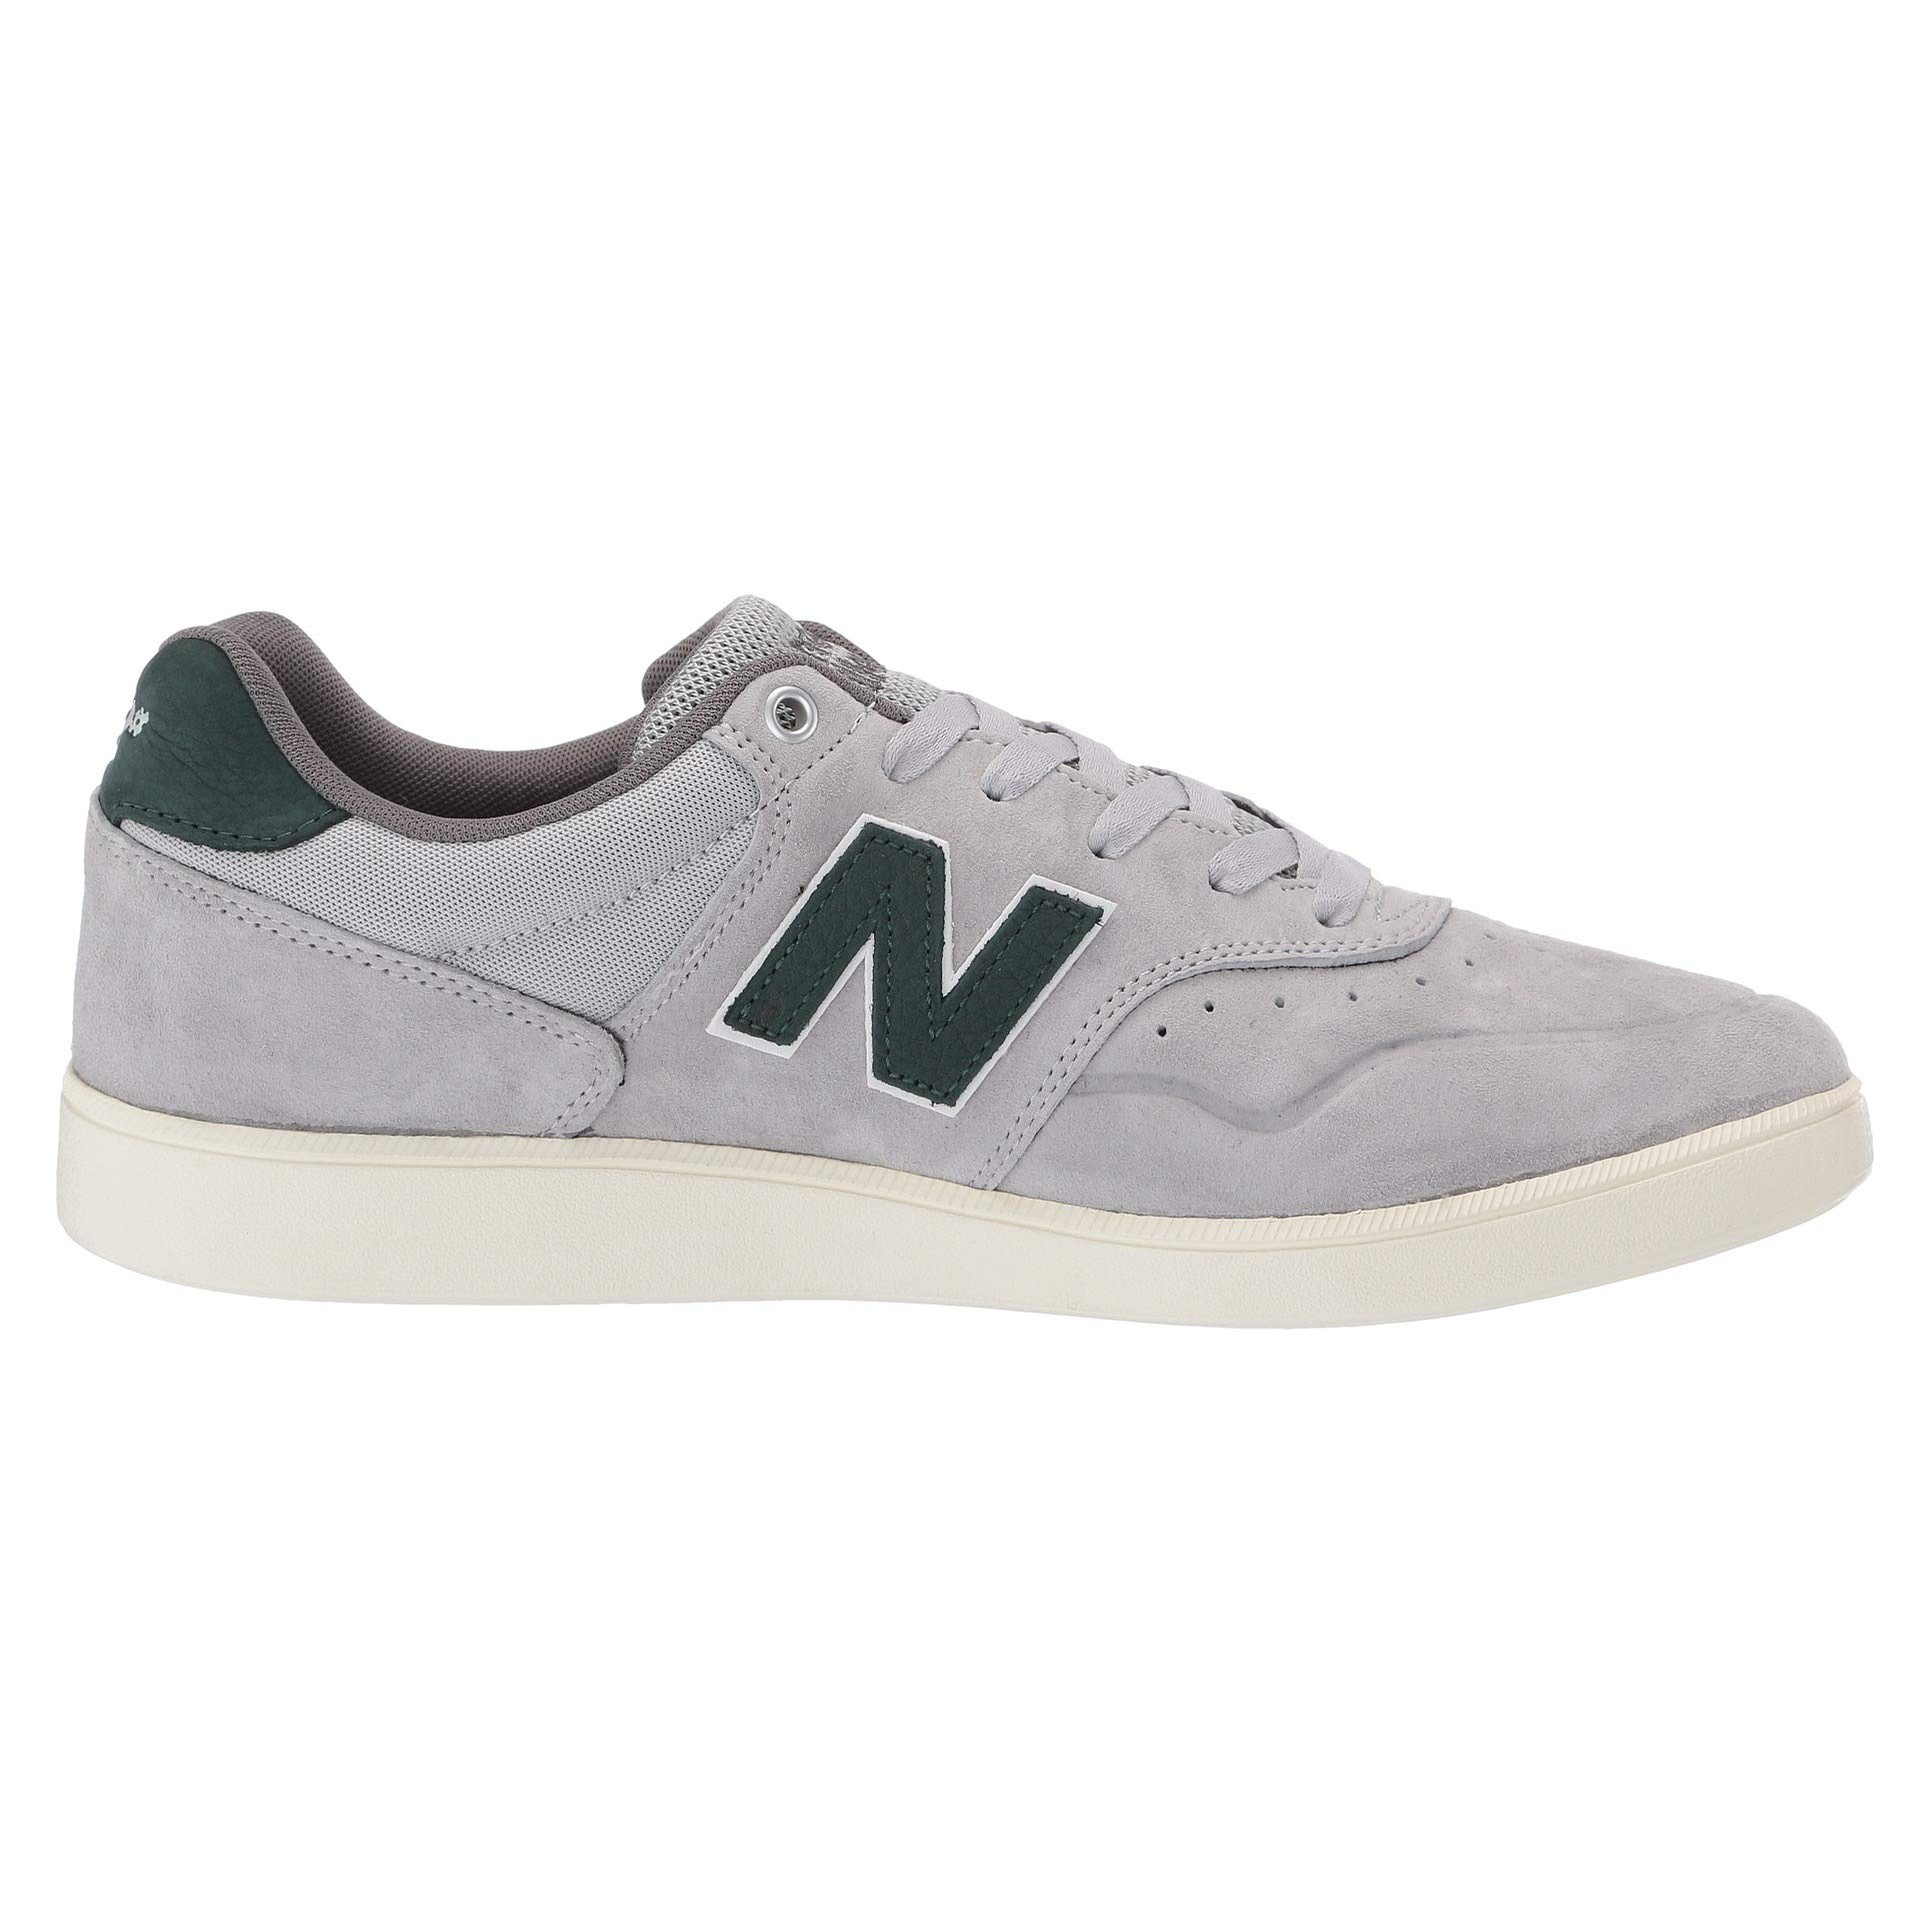 new balance 9000 Online Shopping mall | Find the best prices and ...